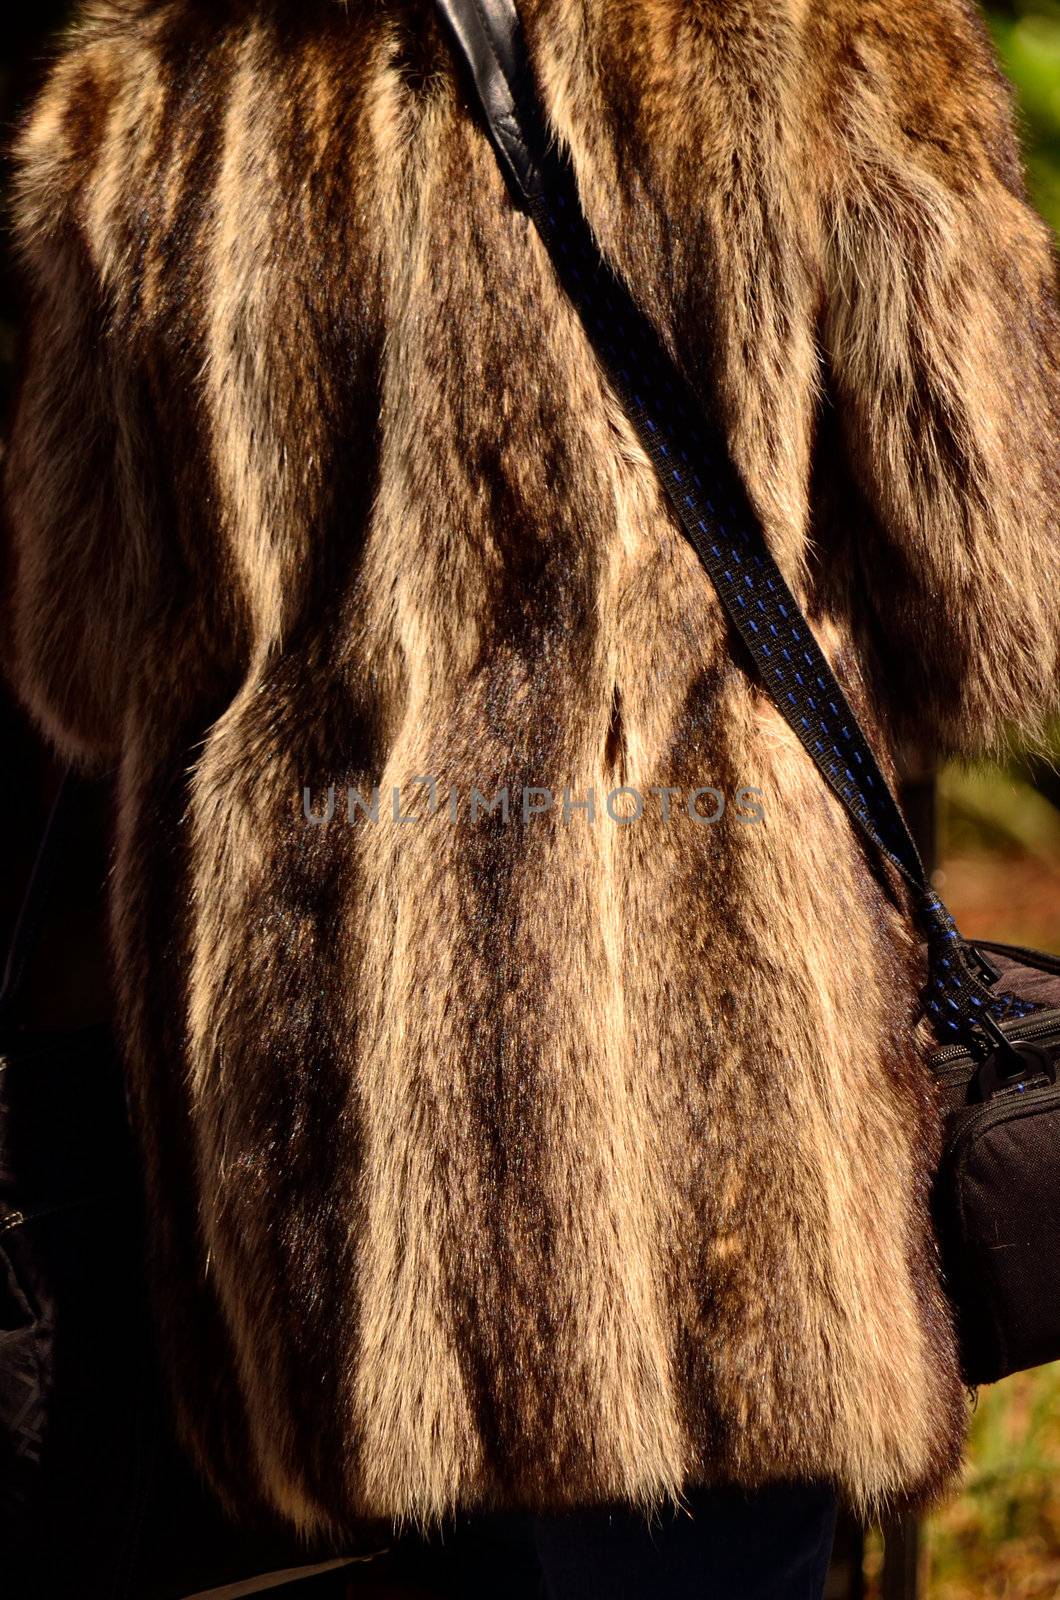 Coat designed with vertical lines of brown and tan fur